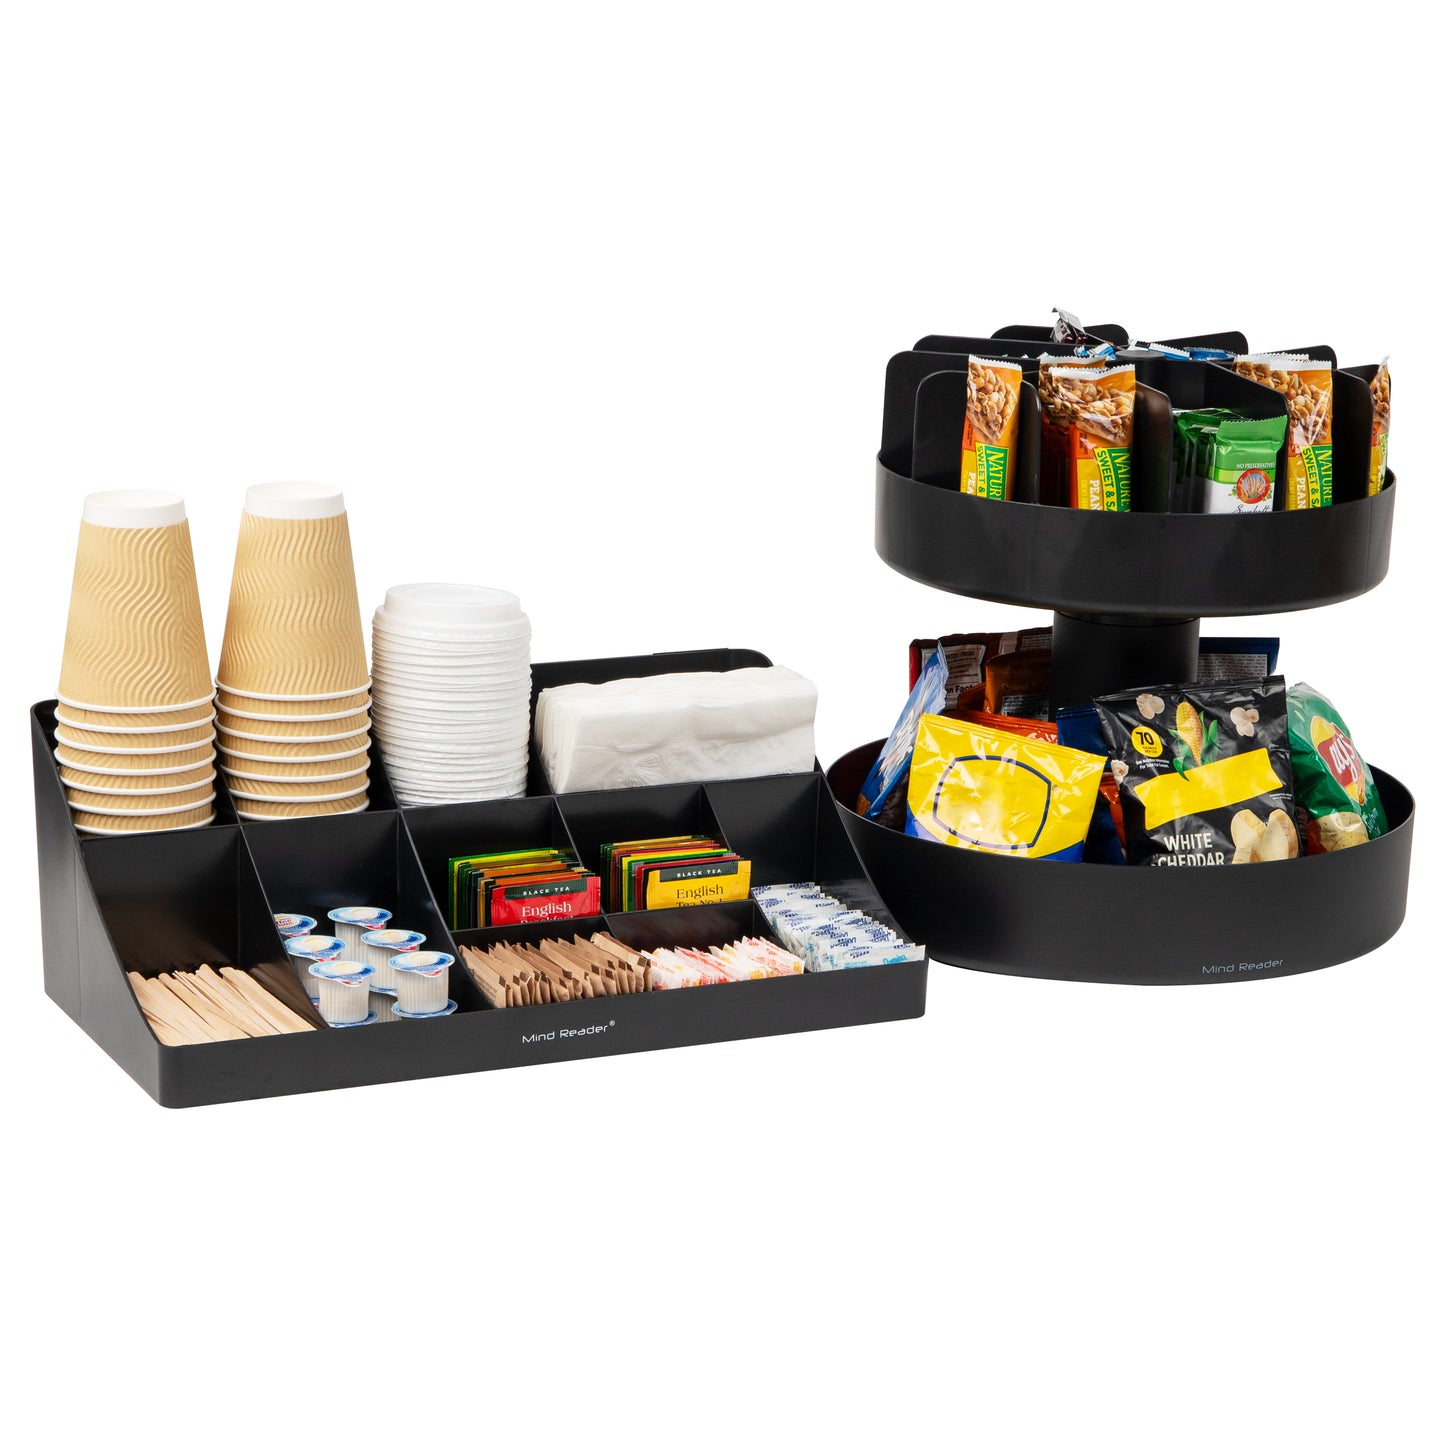 Mind Reader Anchor Collection, 11-Compartment, 2-Tier Coffee Cup and Condiment Storage and 2-Tier Lazy Susan Granola Bar and Snack Storage, Countertop Organizer Set, 14.25"L x 14.25"W x 14"H, Black